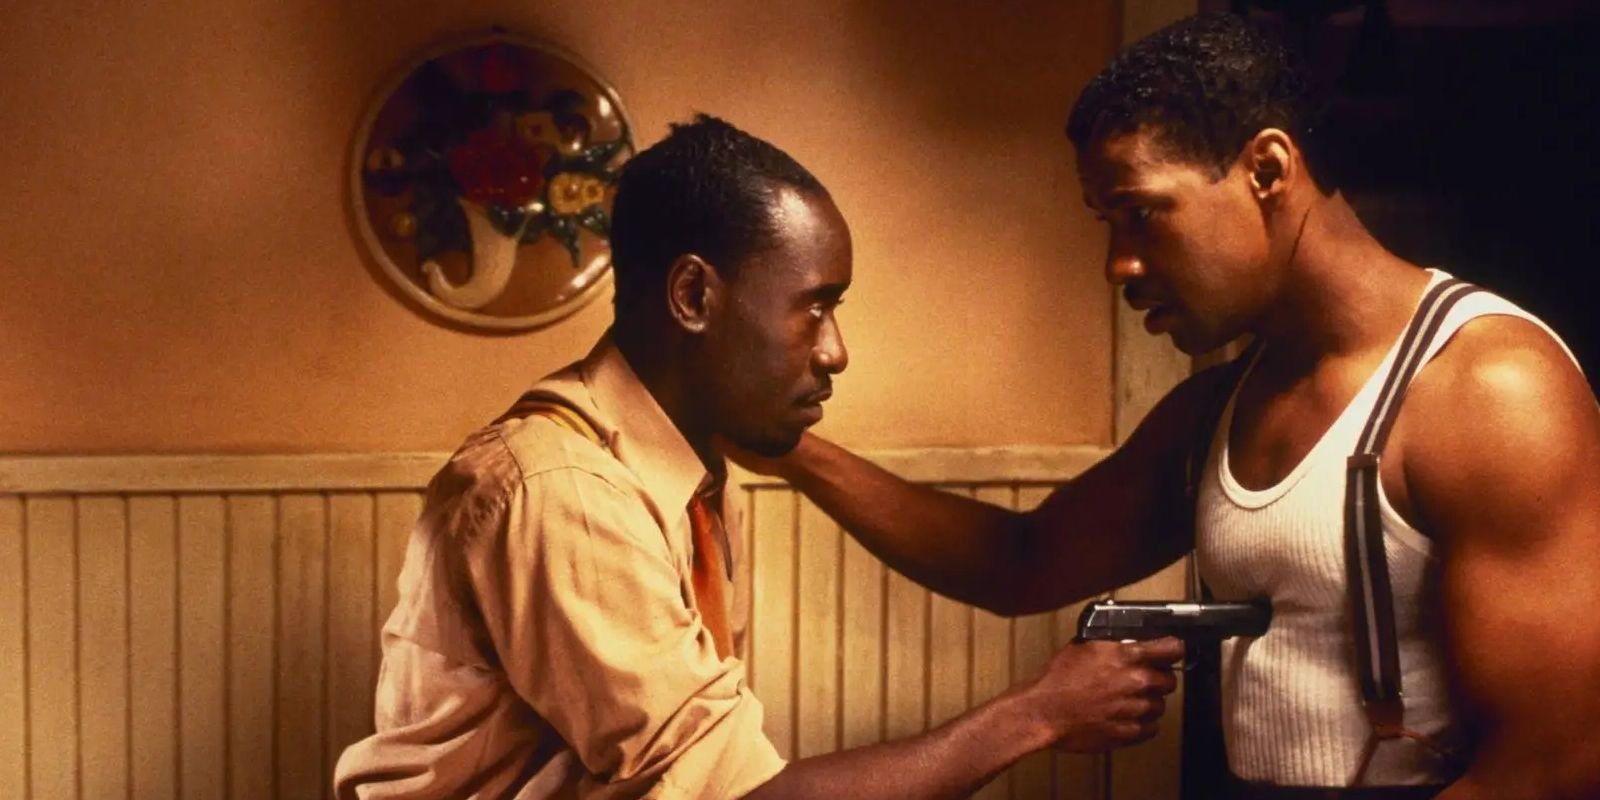 Denzel Washington and Don Cheadle in 'Devil in a Blue Dress'